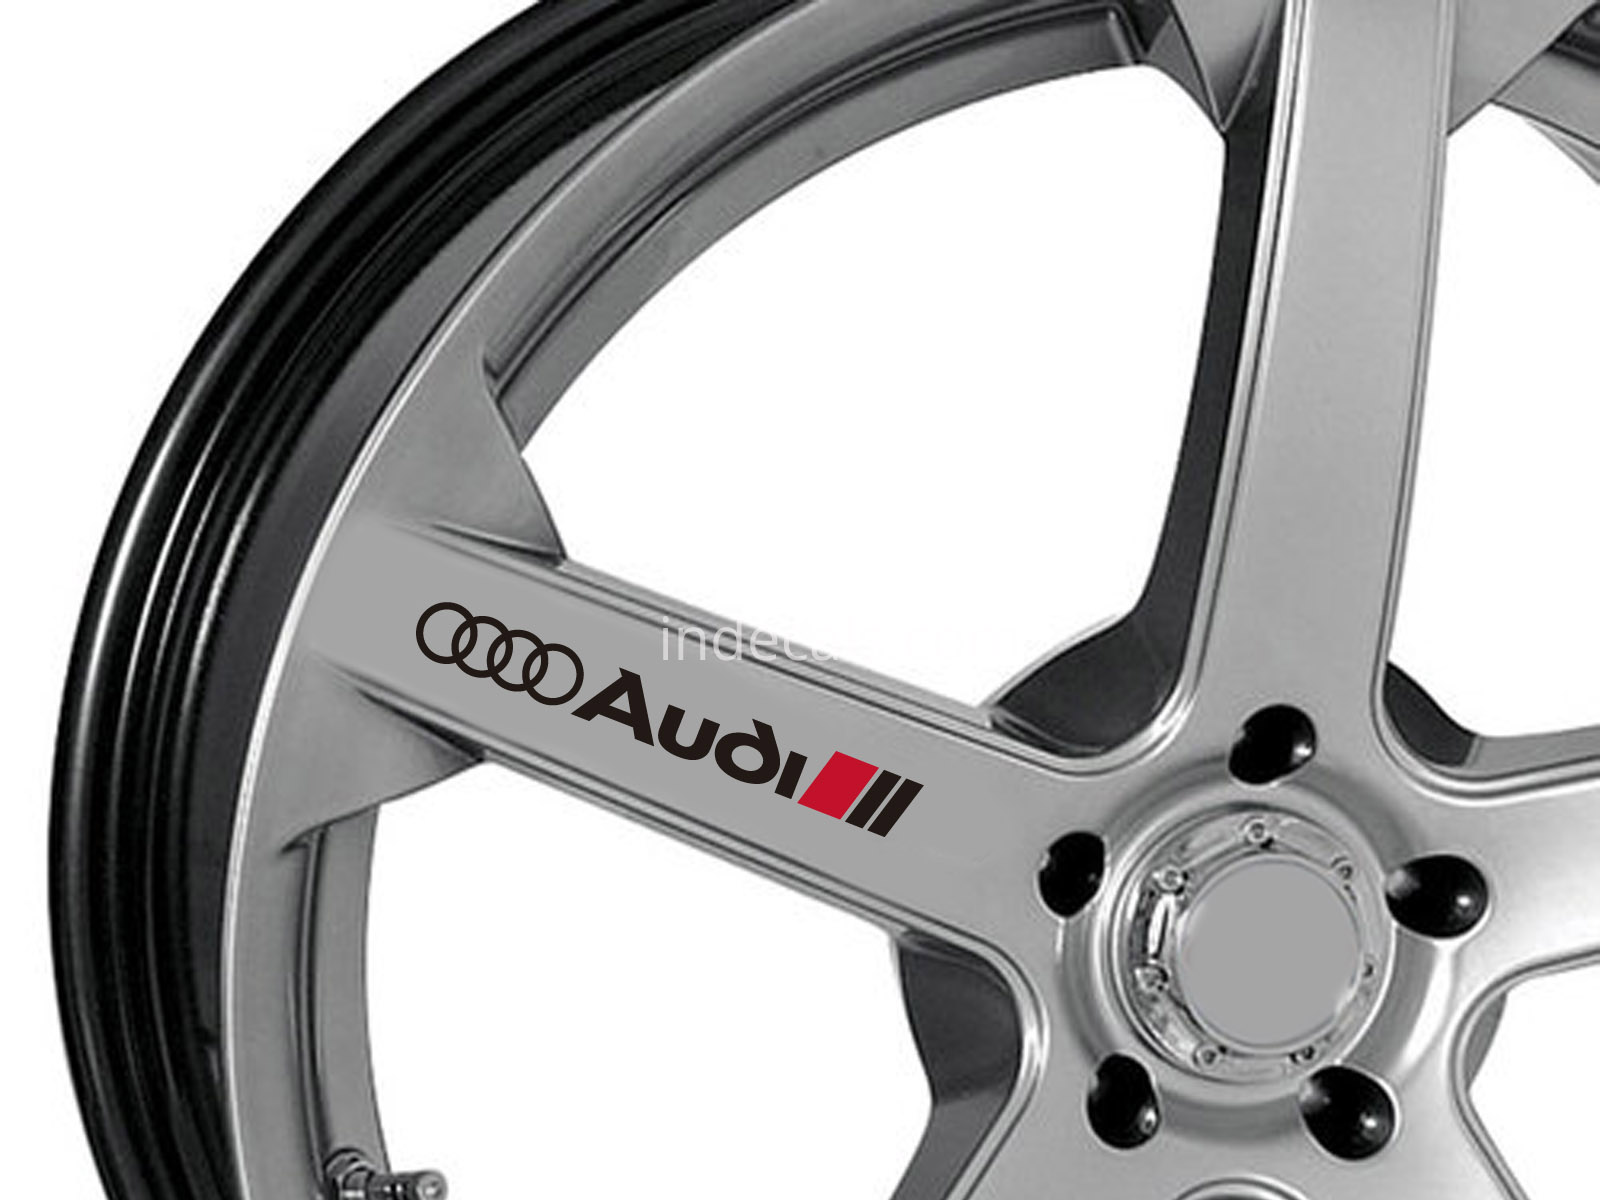 6 x Audi Stickers for Wheels - Black